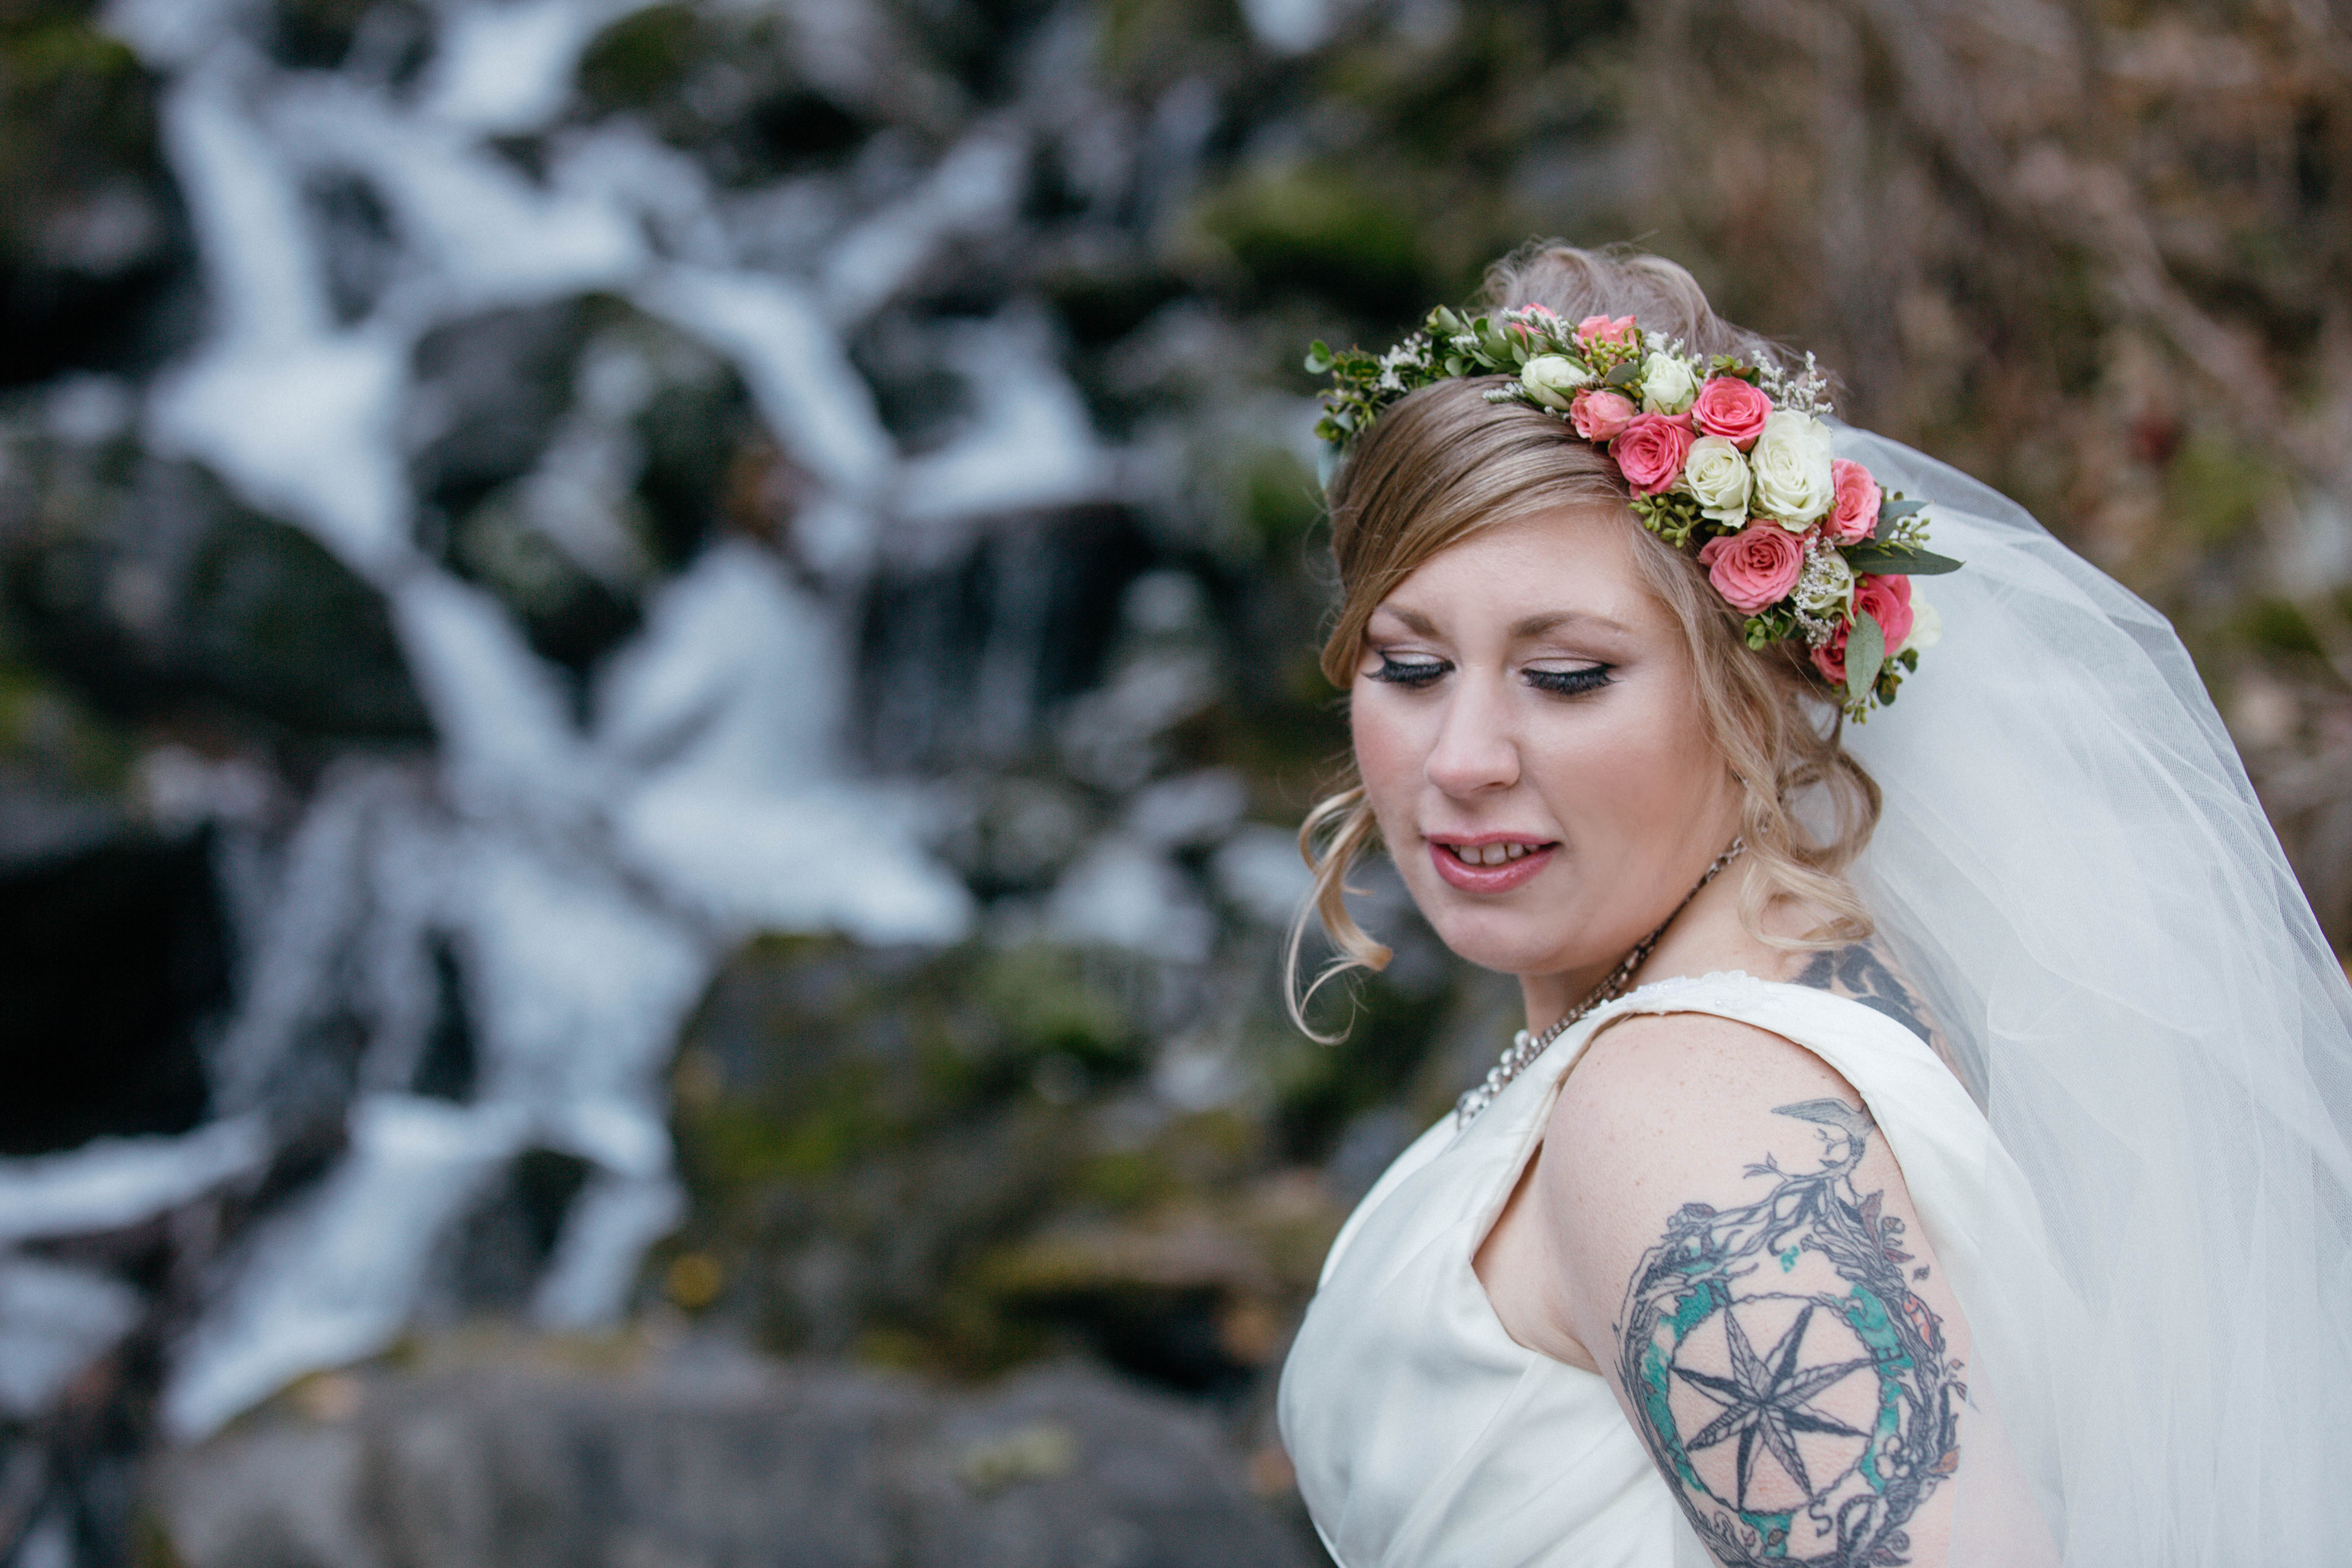 Asymmetrical bridal flower crown | designed by Natasha Price of Paper Peony and photo by Love Adventured